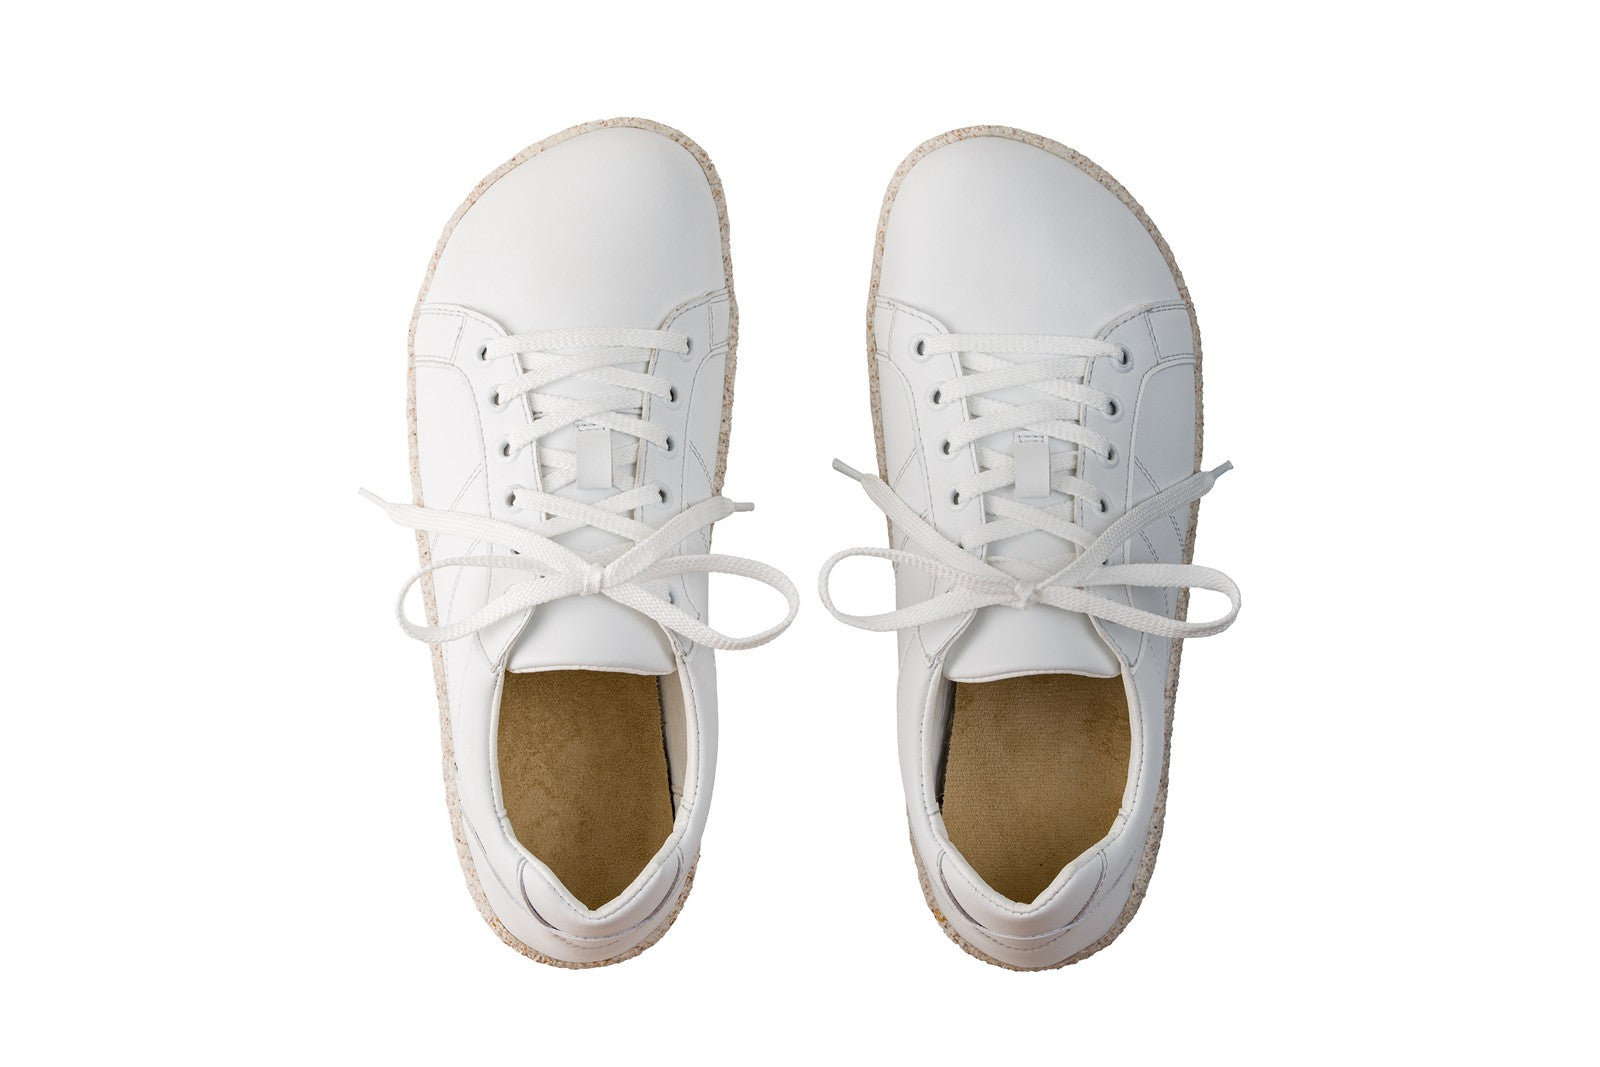 Anslået Nævne bassin Incredibly comfortable men's white sneakers [Free Exchange] | Ahinsa shoes  👣